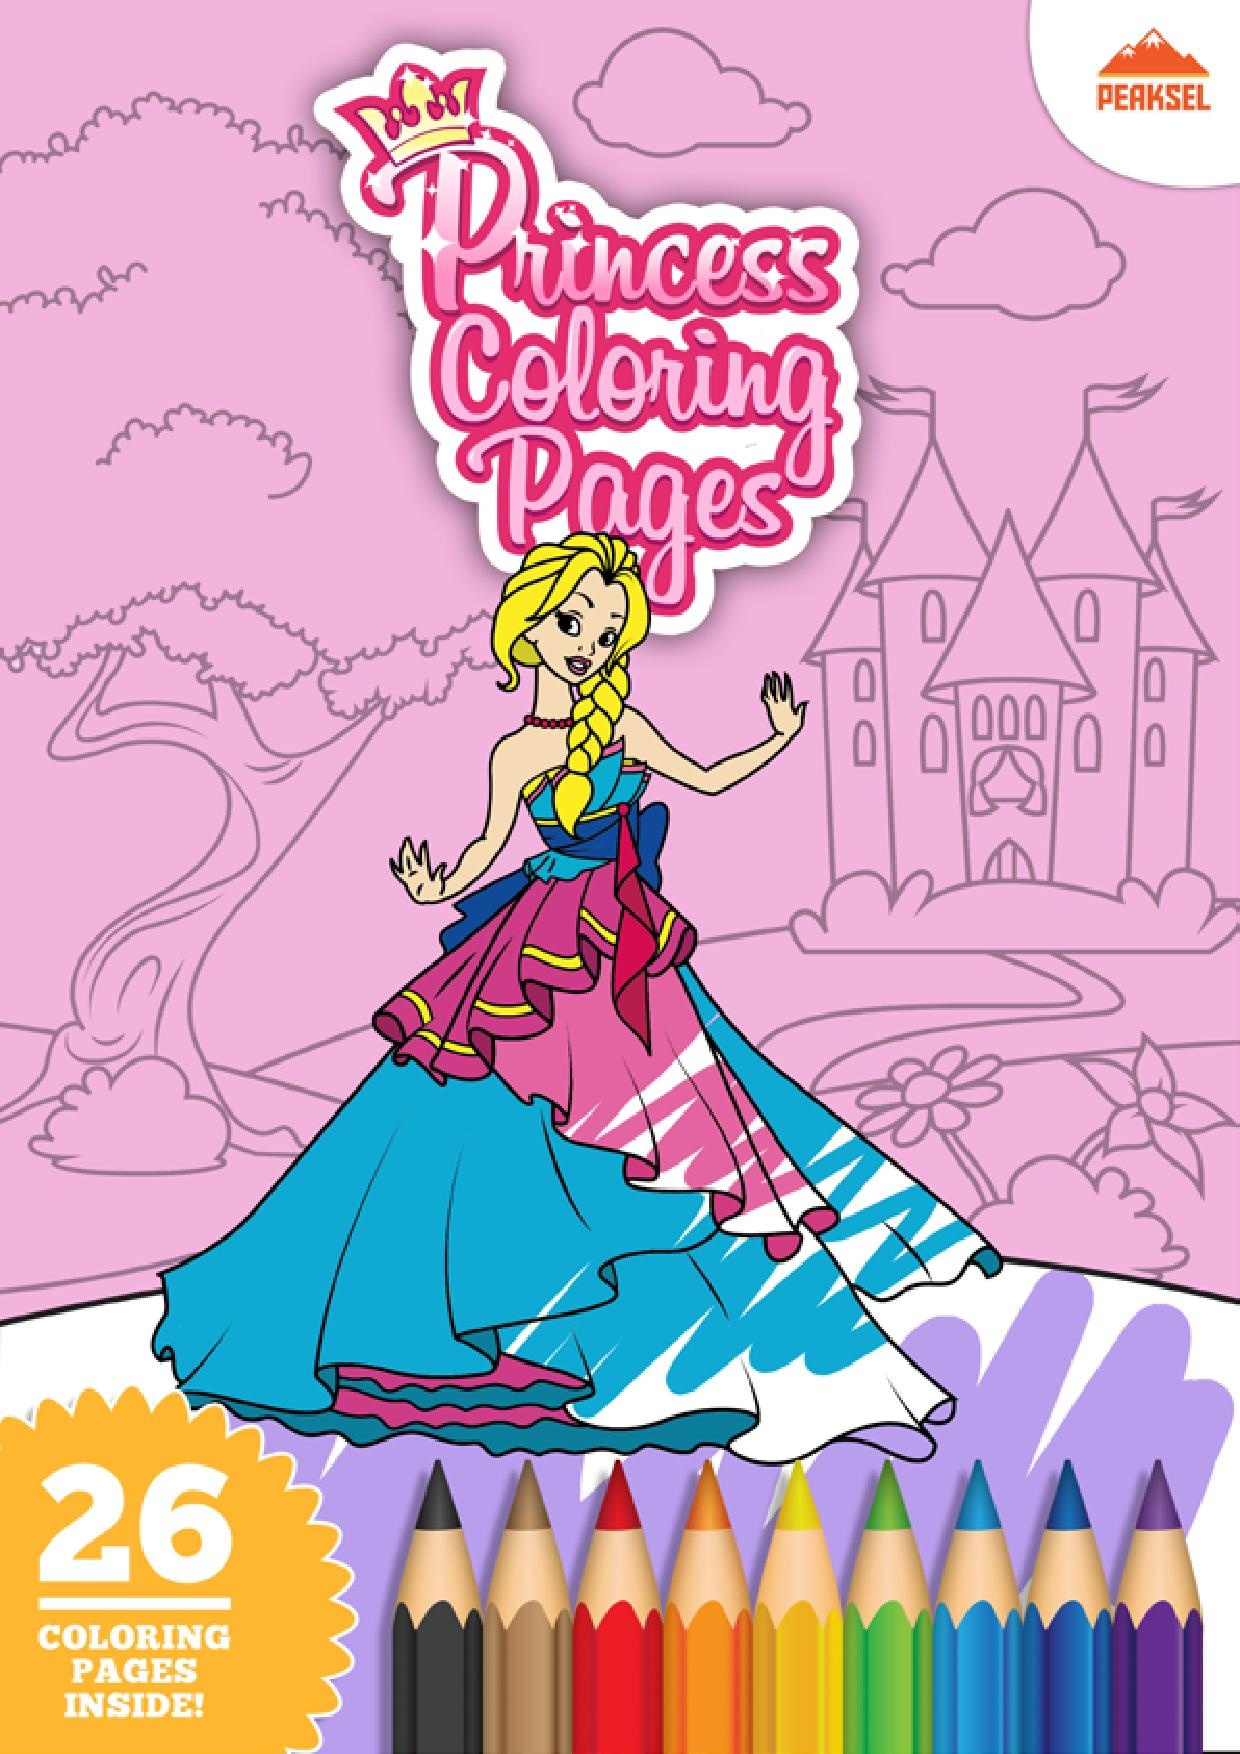 Pdf Coloring Pages For Kids Fileprincess Coloring Pages Coloring Book For Kidspdf